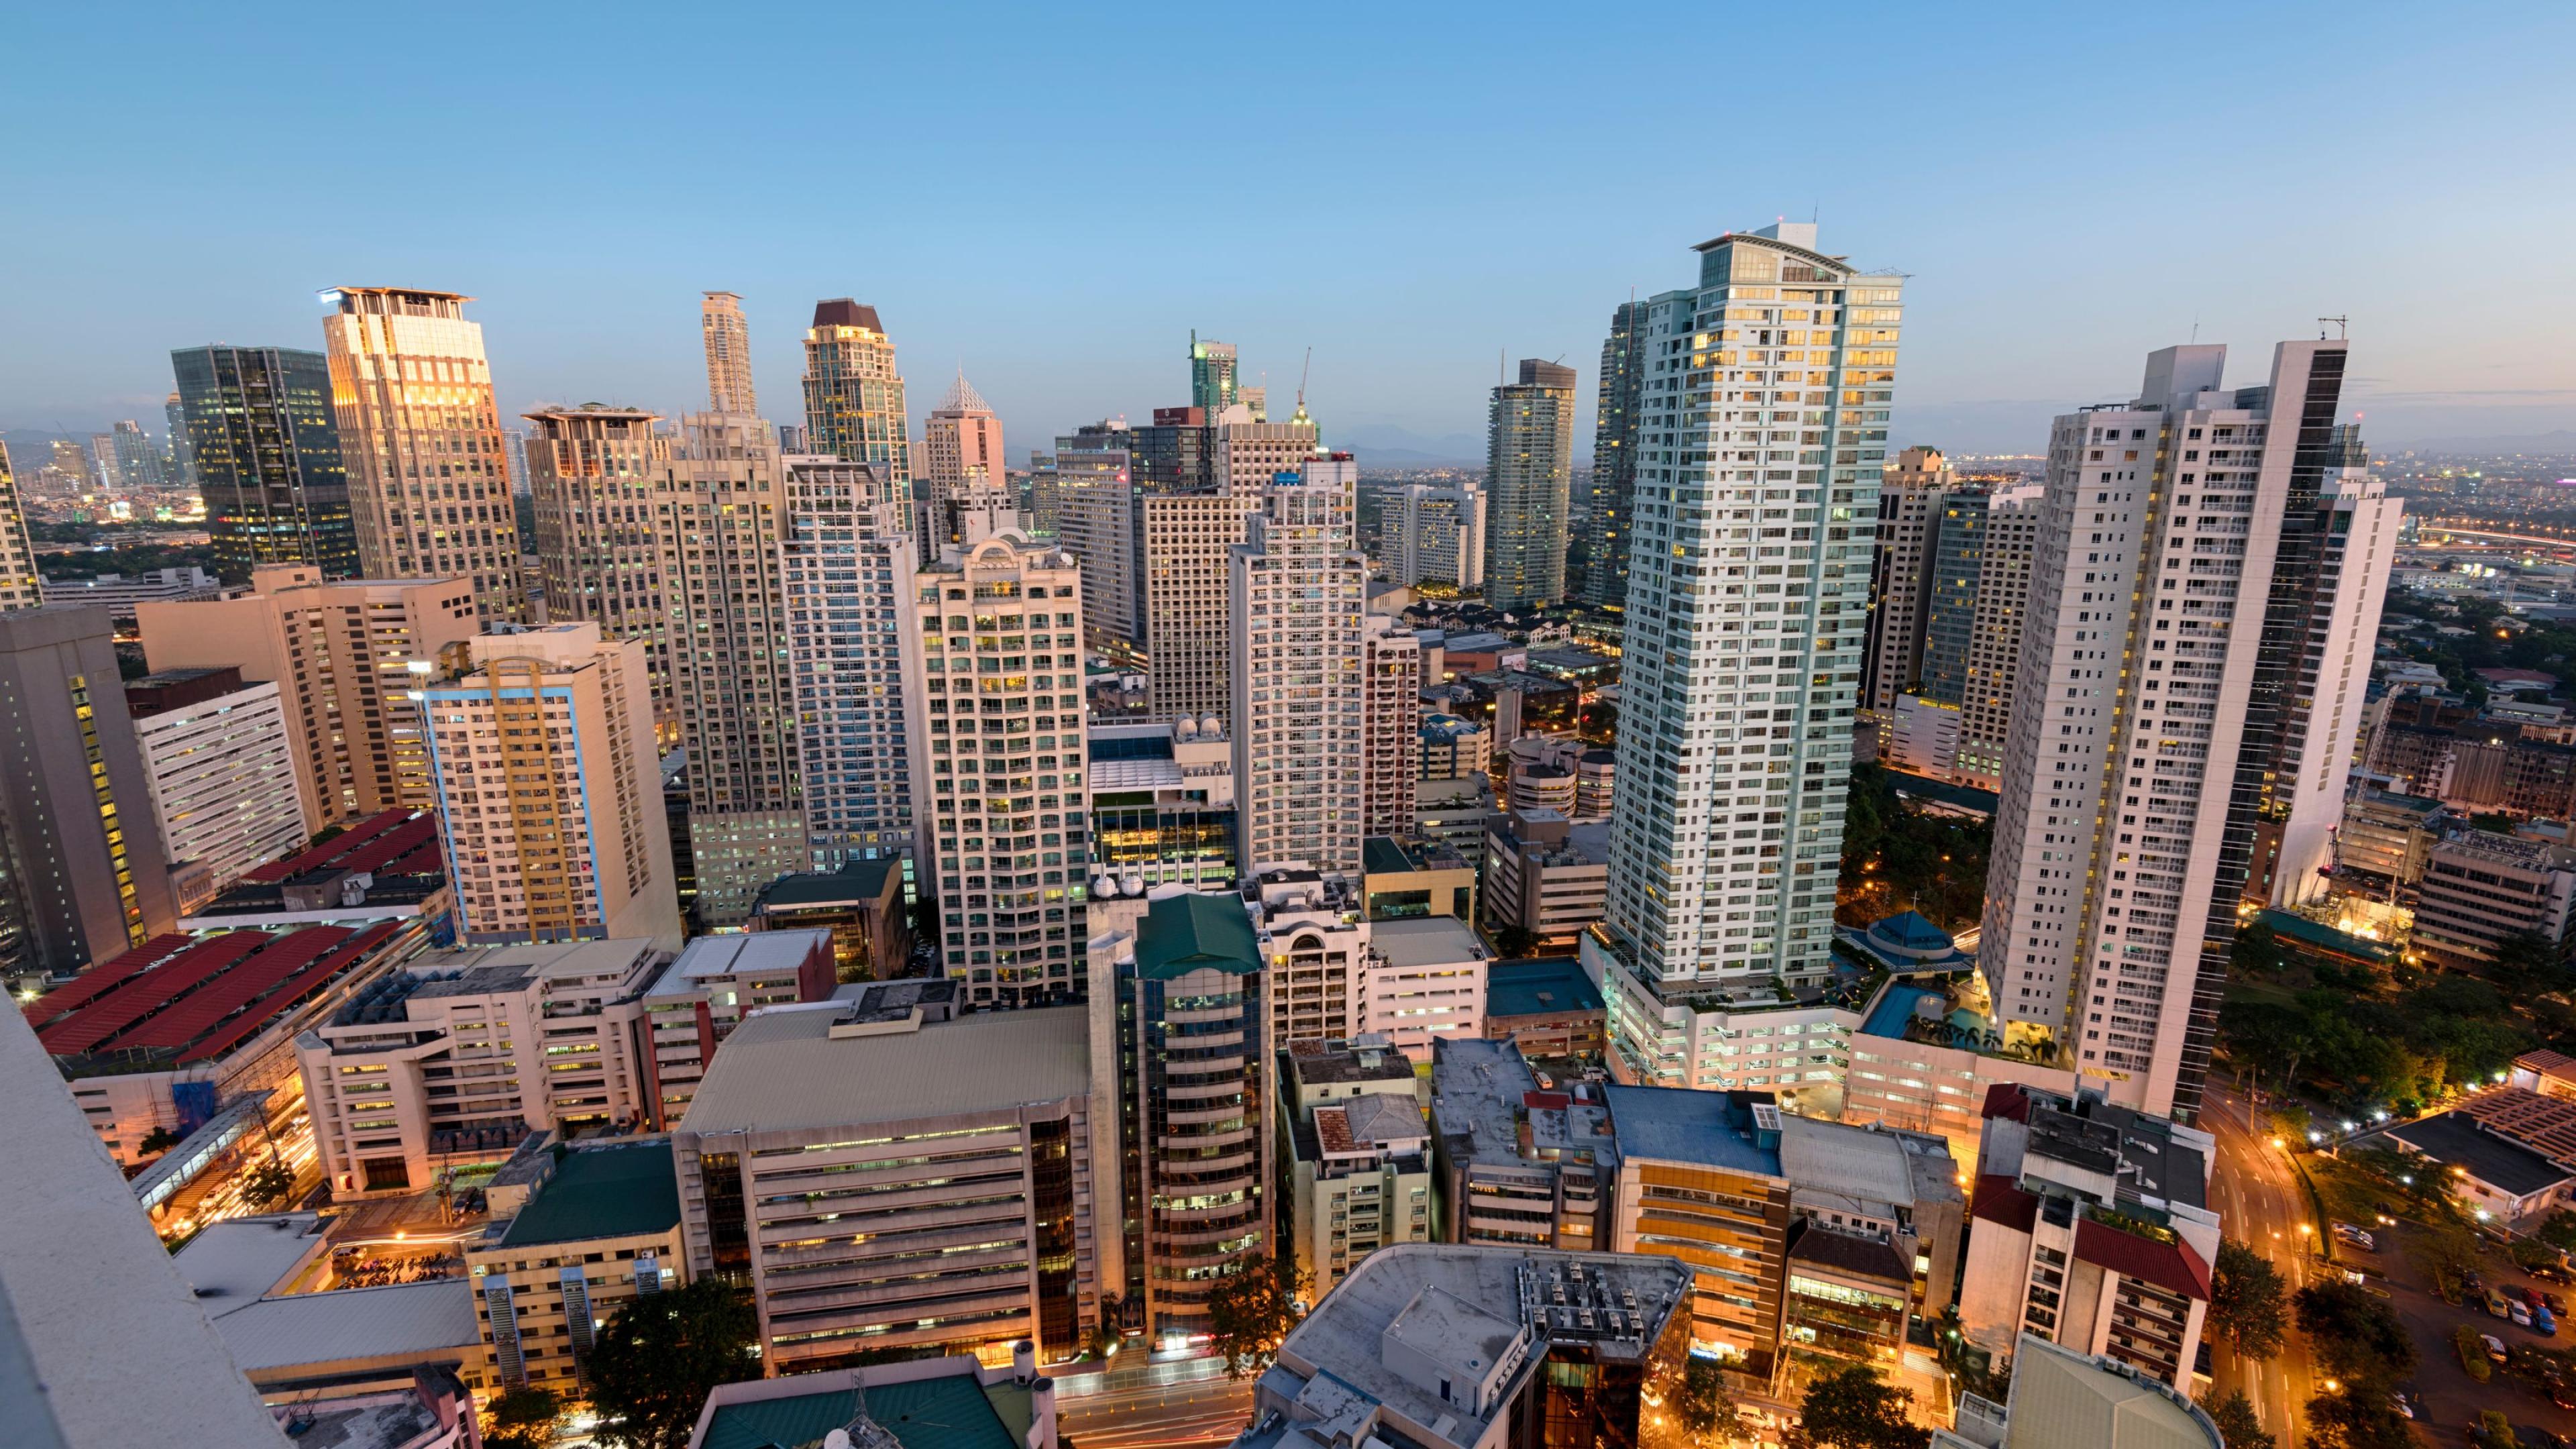 skyline view of highrises in Manila Philippines seen from the air at dusk